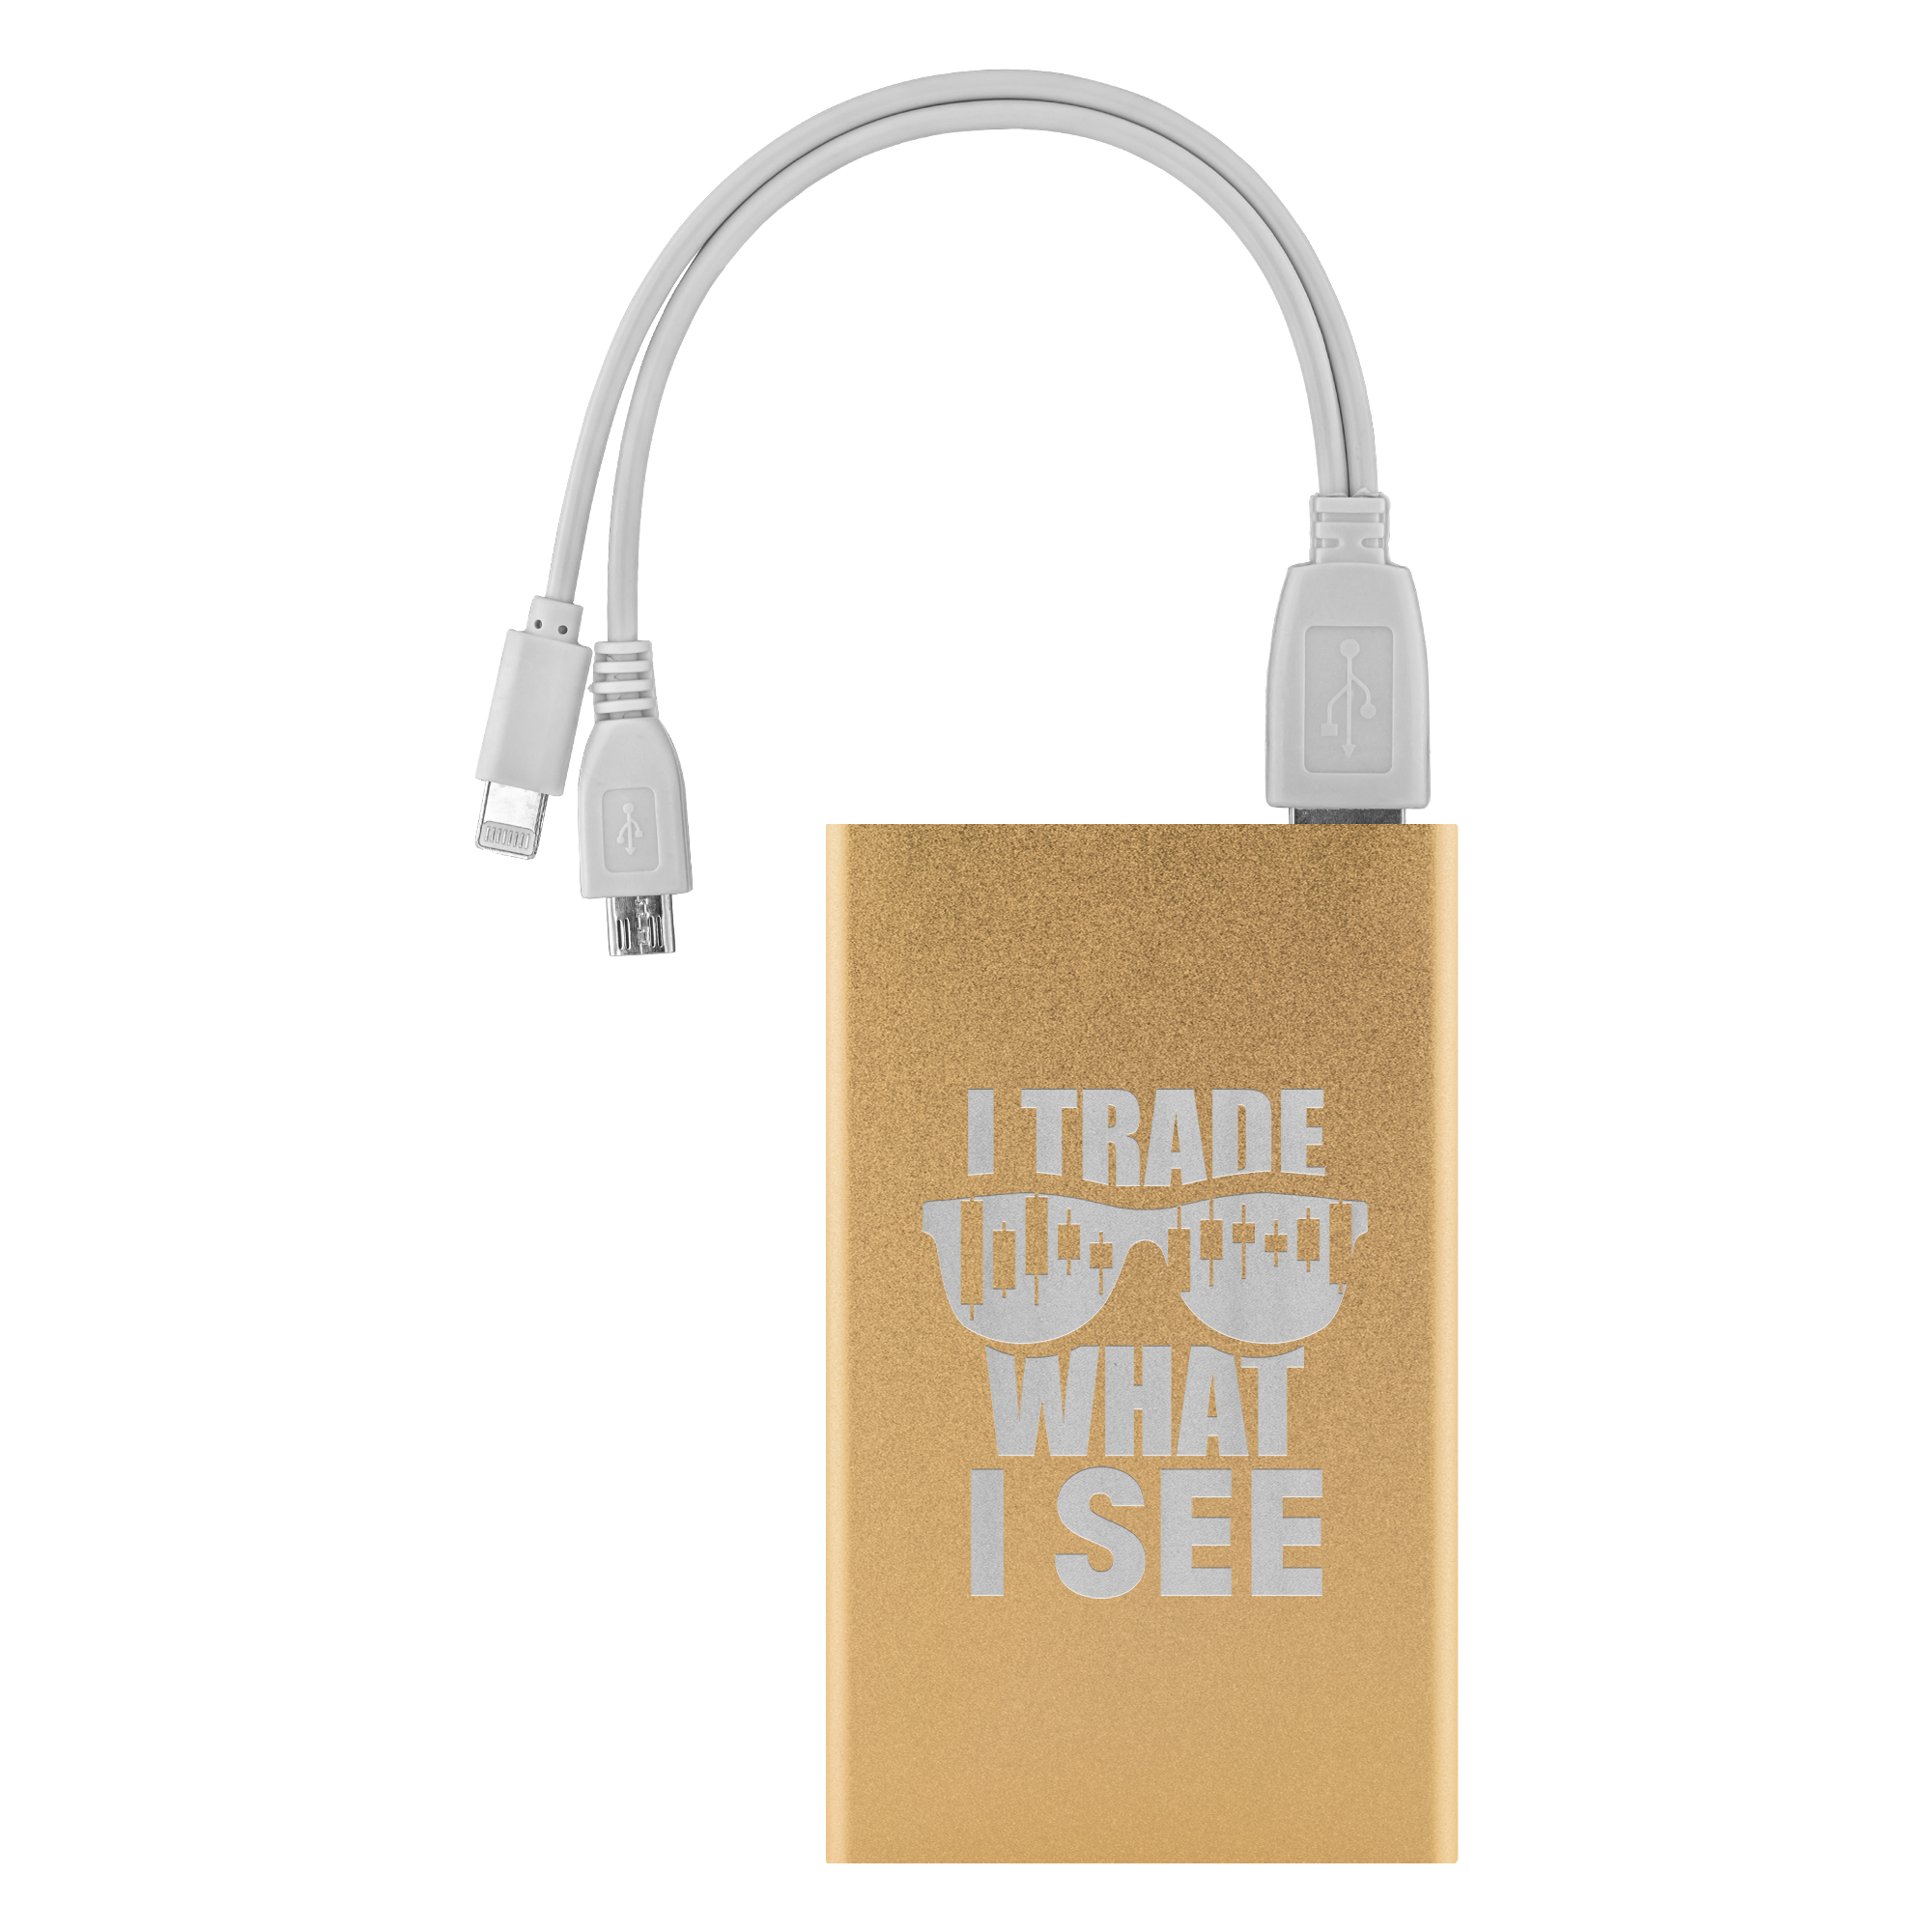 Buy gold Power Banks - Trade What I See